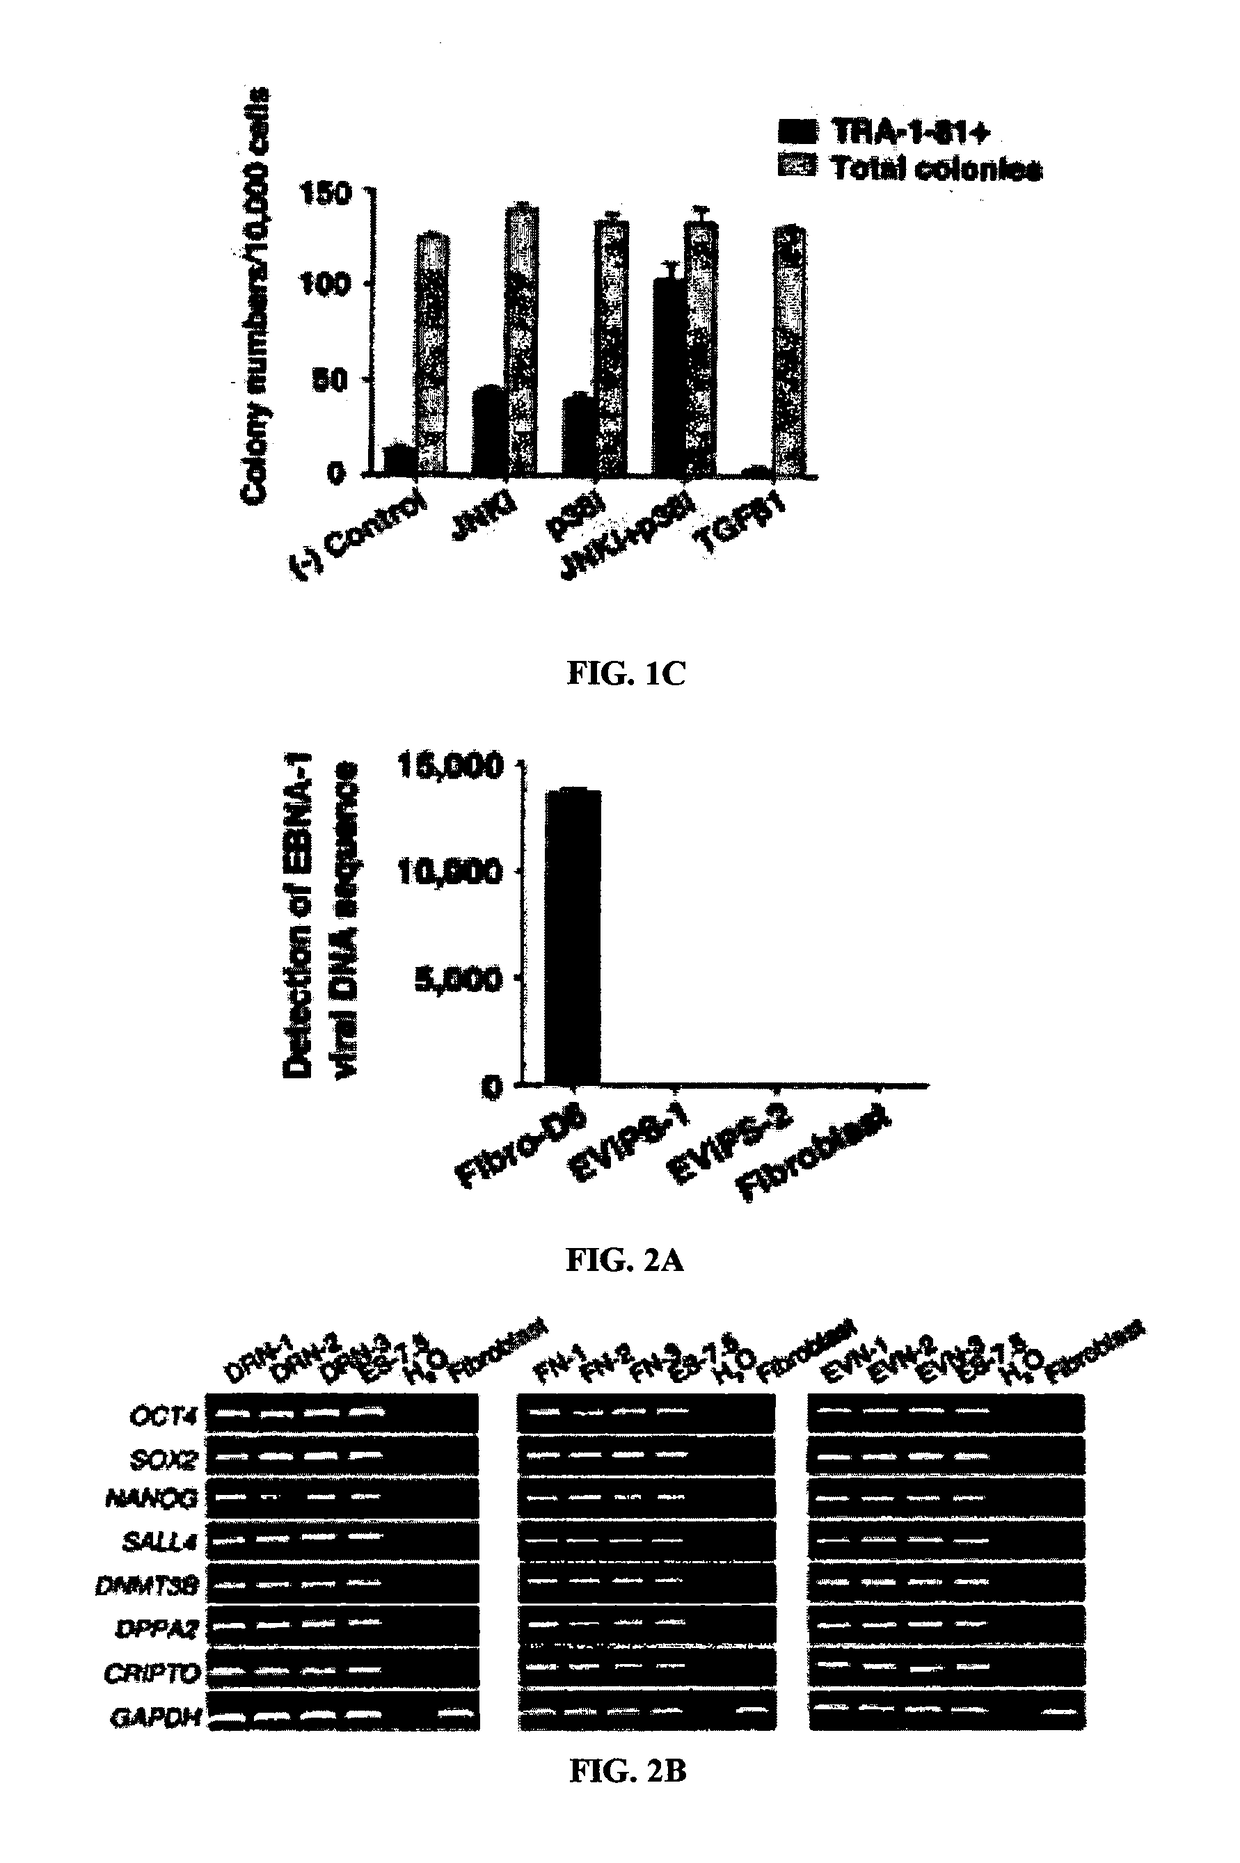 Tgfß signaling independent naïve induced pluripotent stem cells, methods of making and use